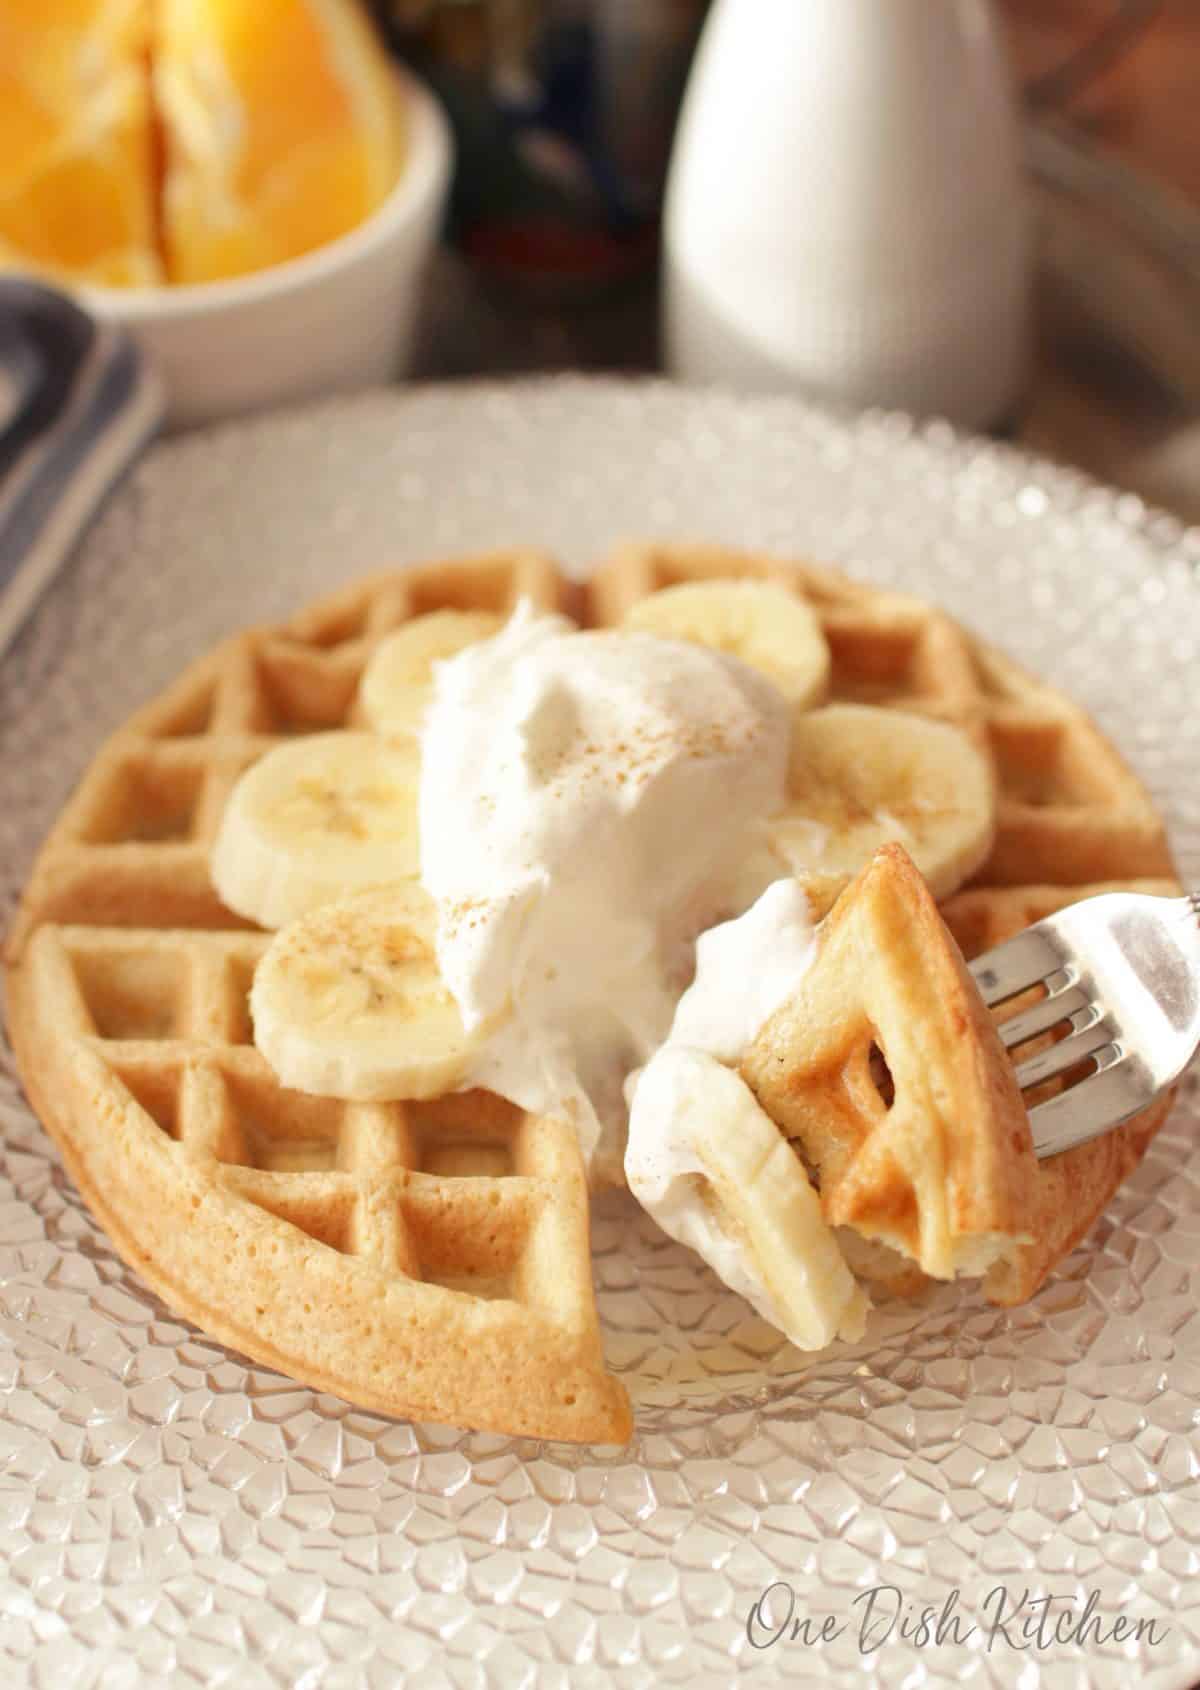 A forkful of waffle with whipped cream, banana slices, and dusted with cinnamon on a large plate.